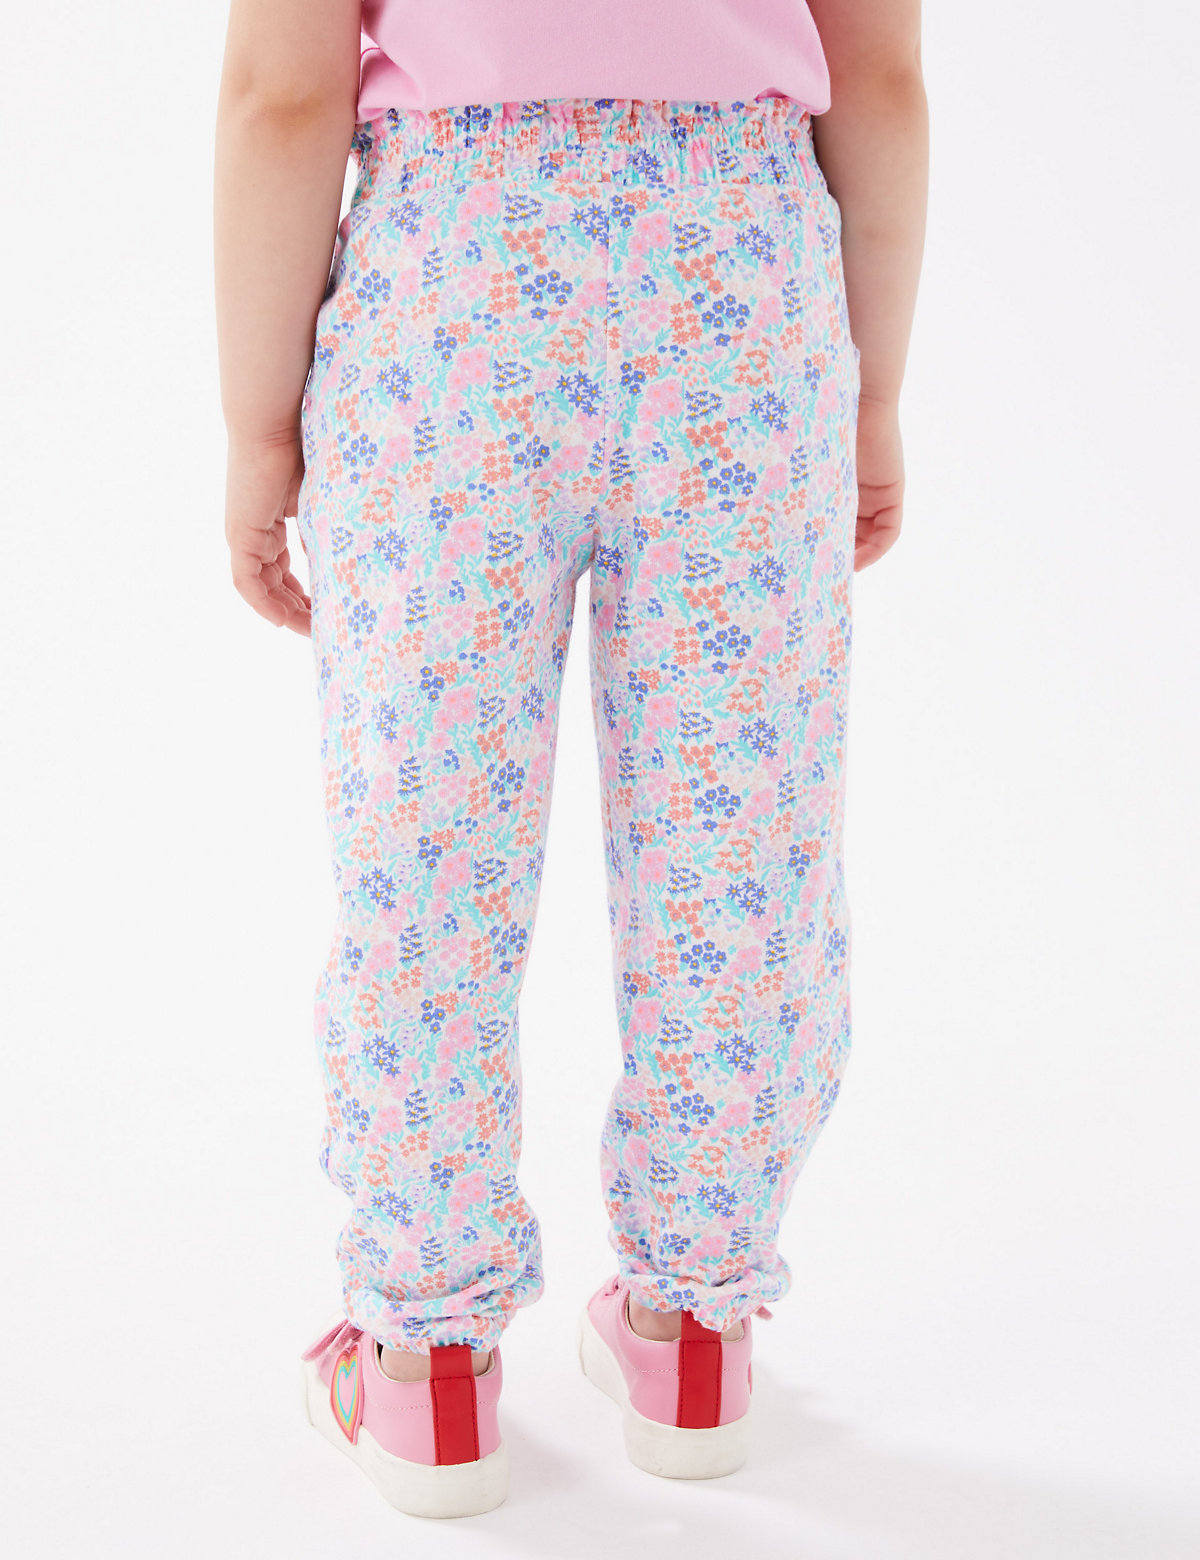 Pure Cotton Floral Trousers (2-7 Yrs)